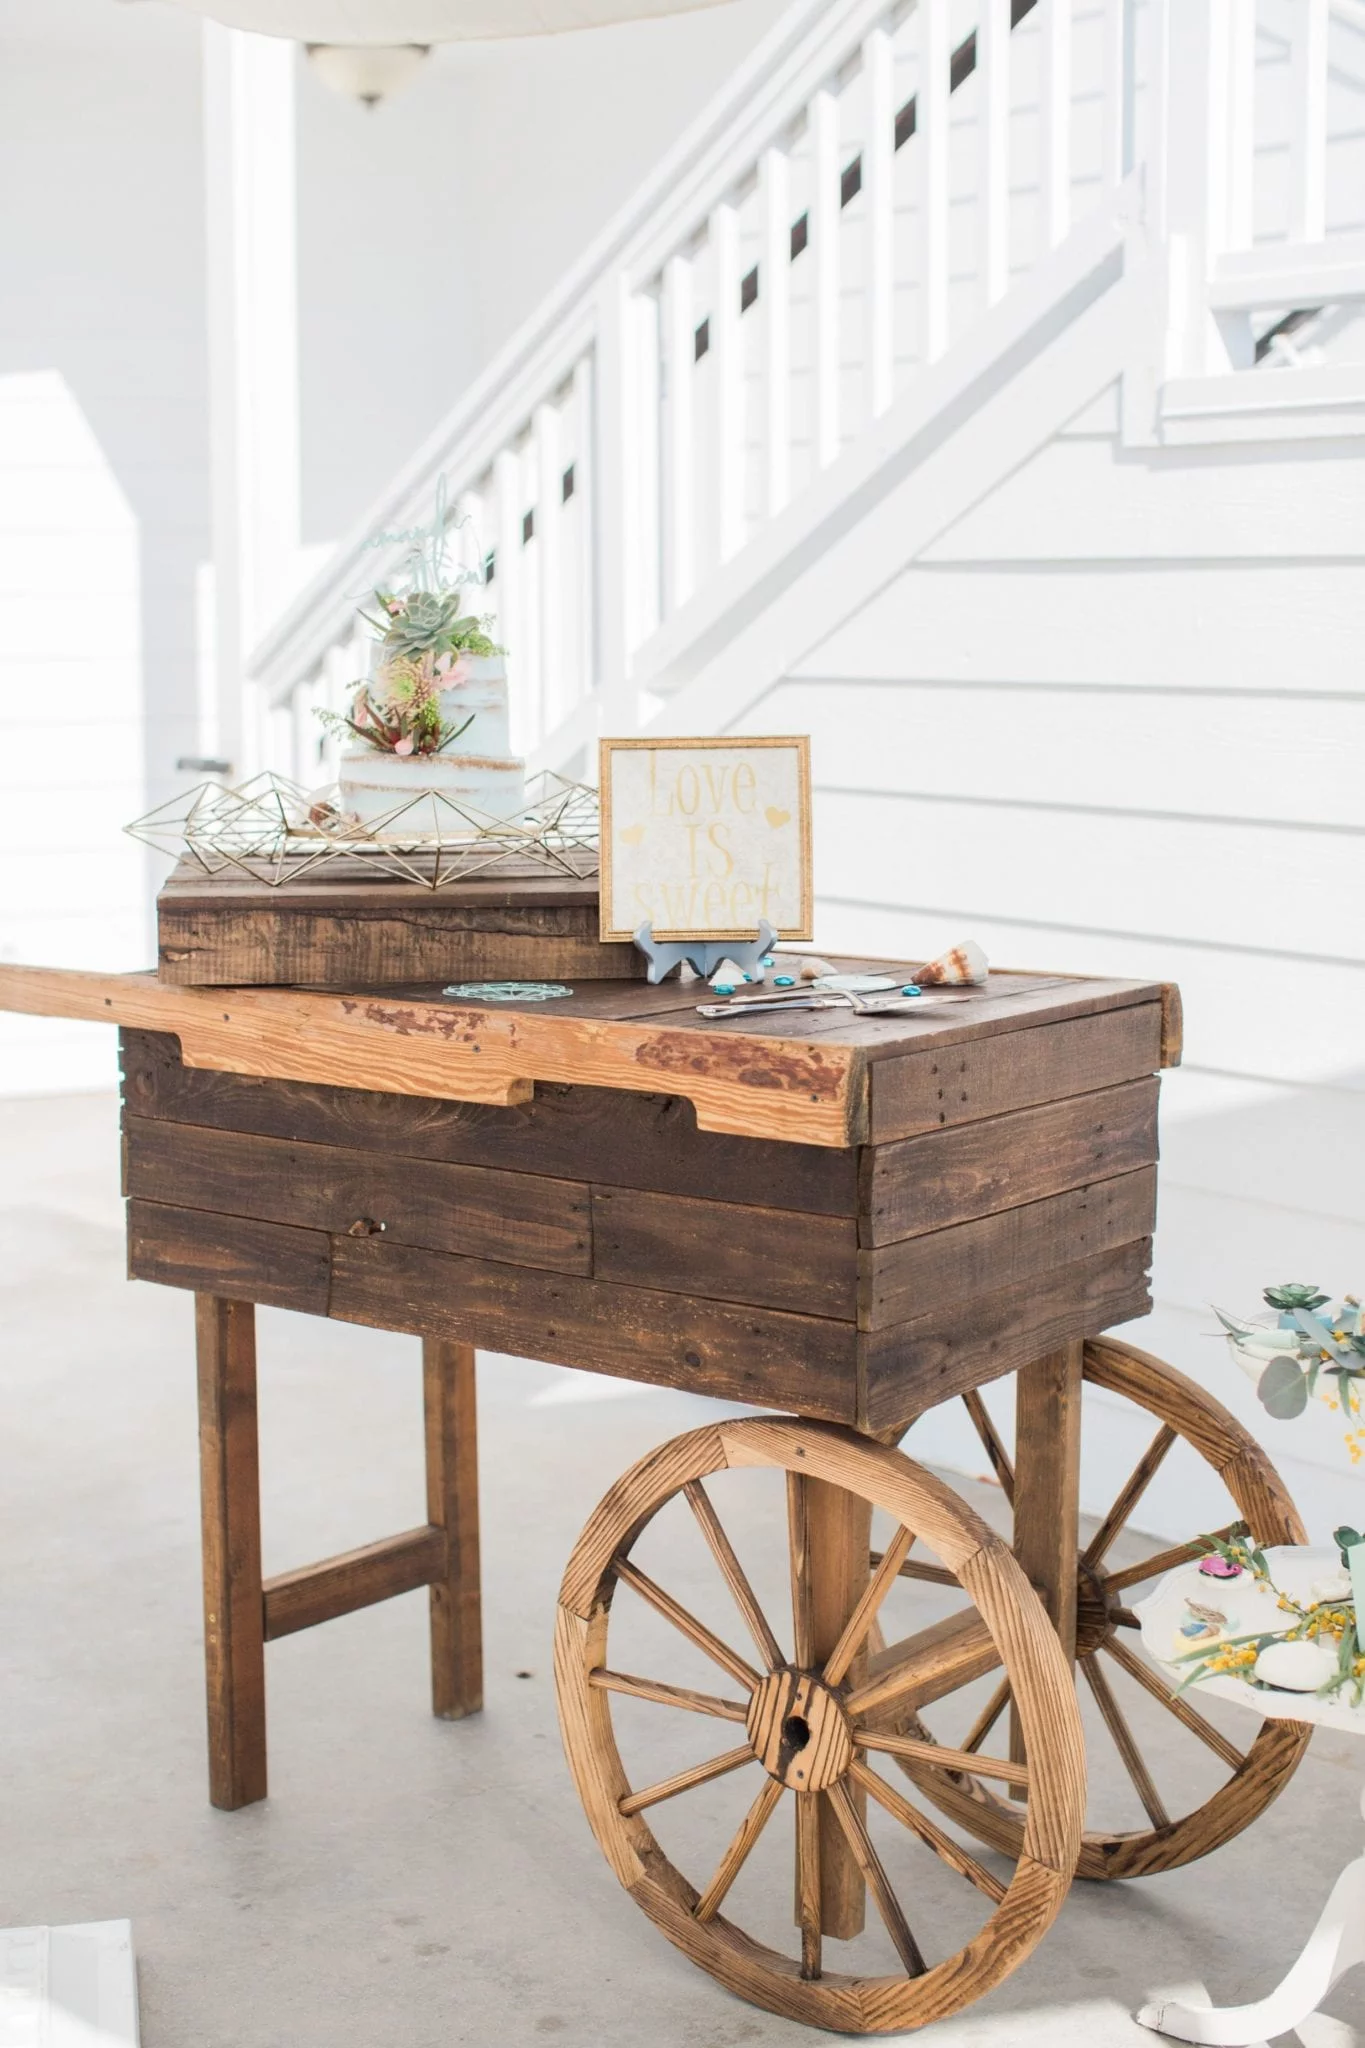 A rustic wooden cart adorned with a charming sign, ideal for weddings in Southern California.